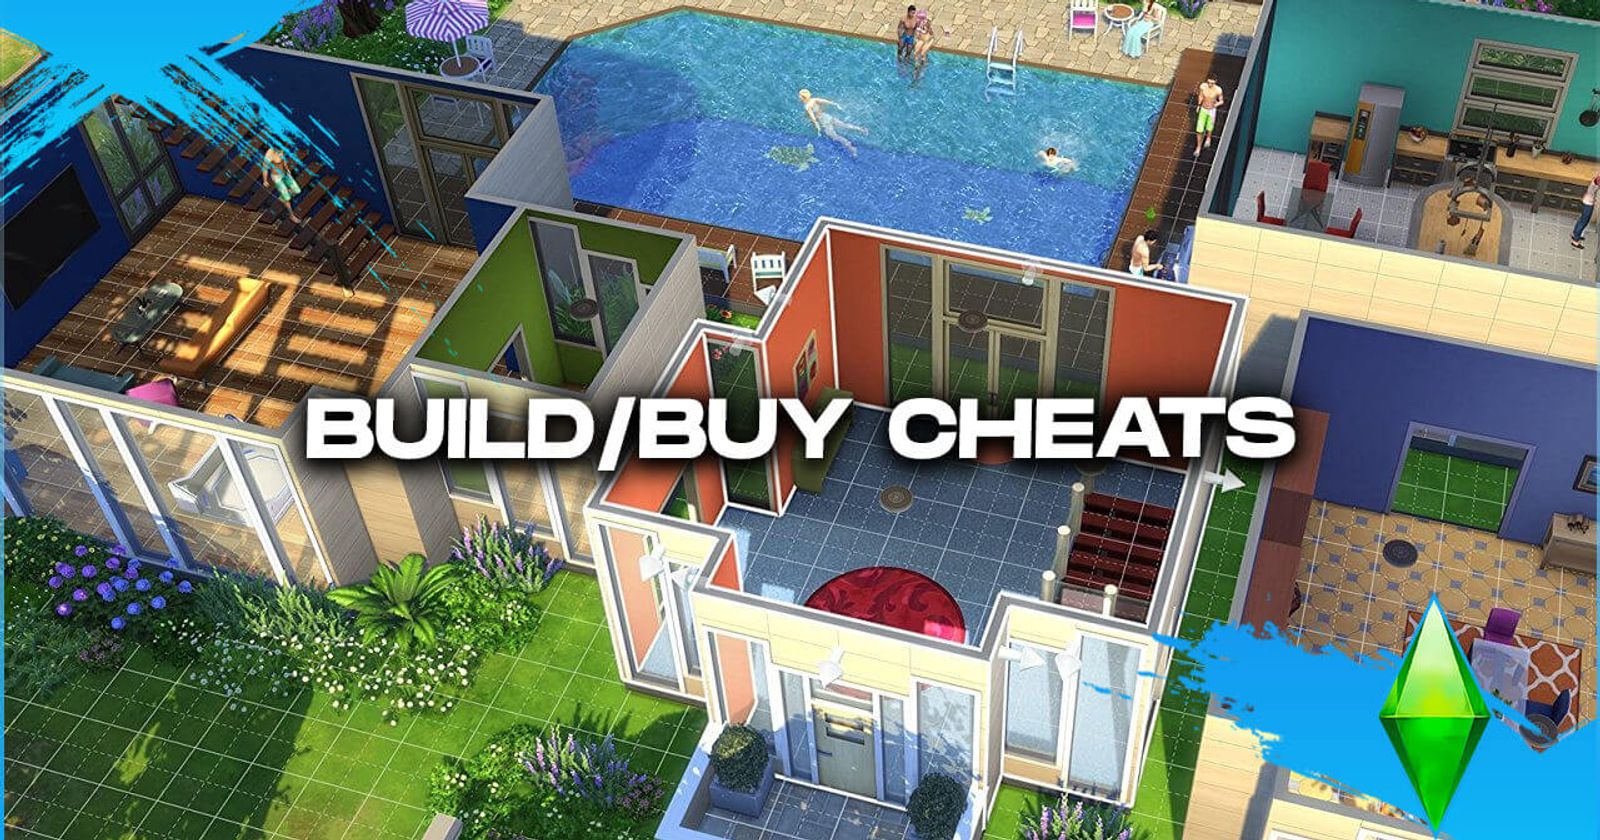 The Sims 4: Build/Buy Mode Cheats For PS4, Xbox One, PC & Mac